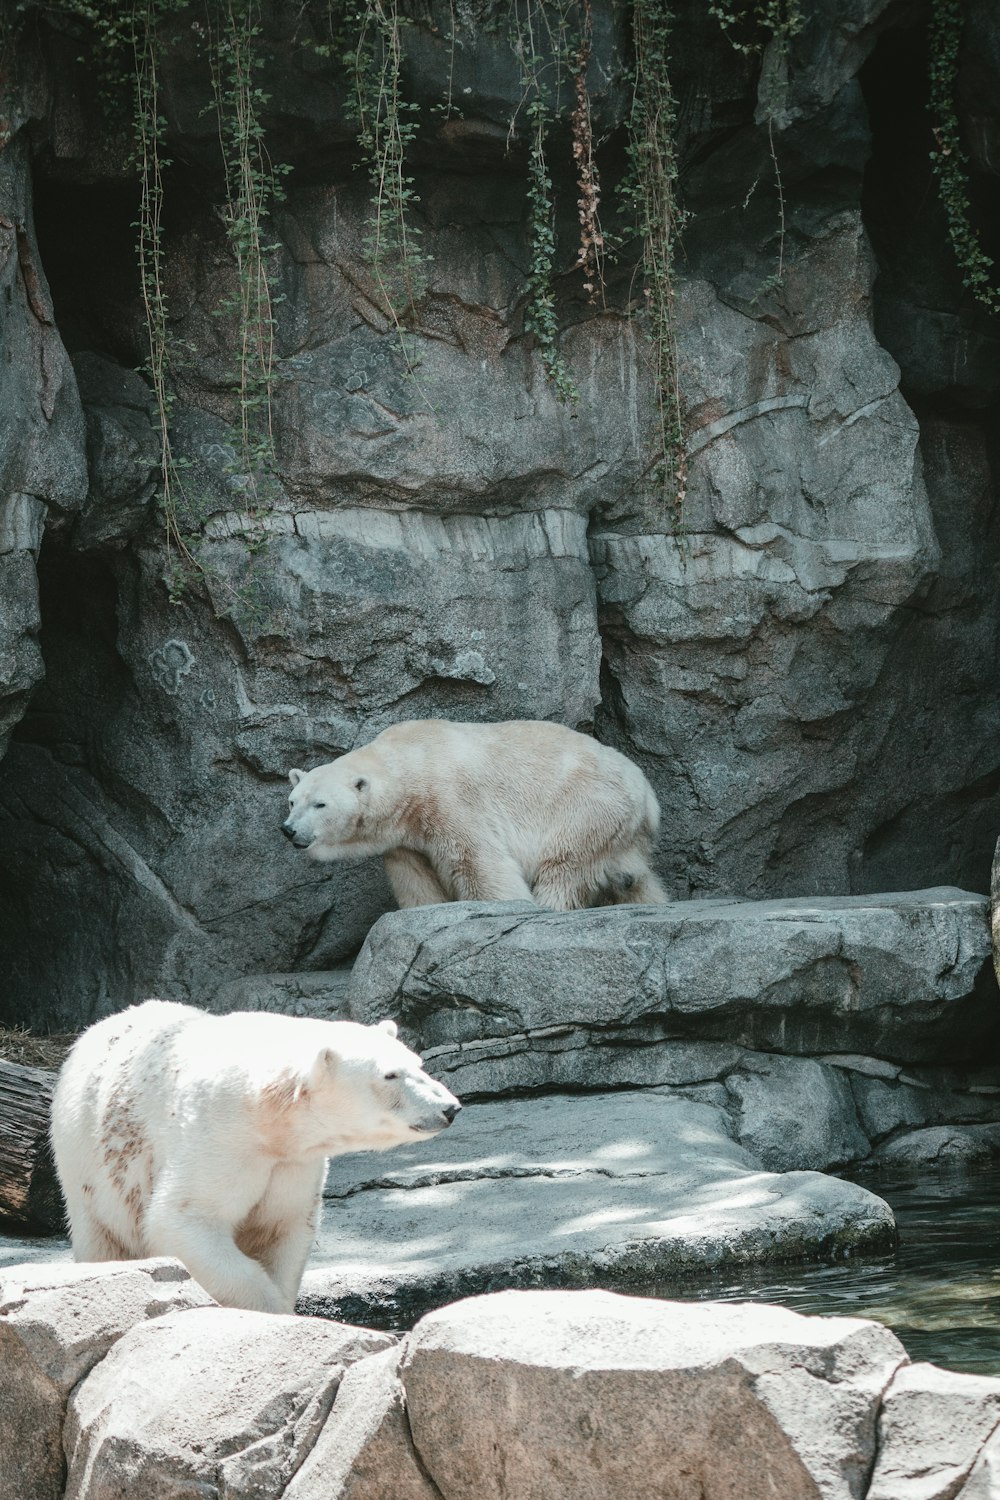 two polar bears in an enclosure at the zoo